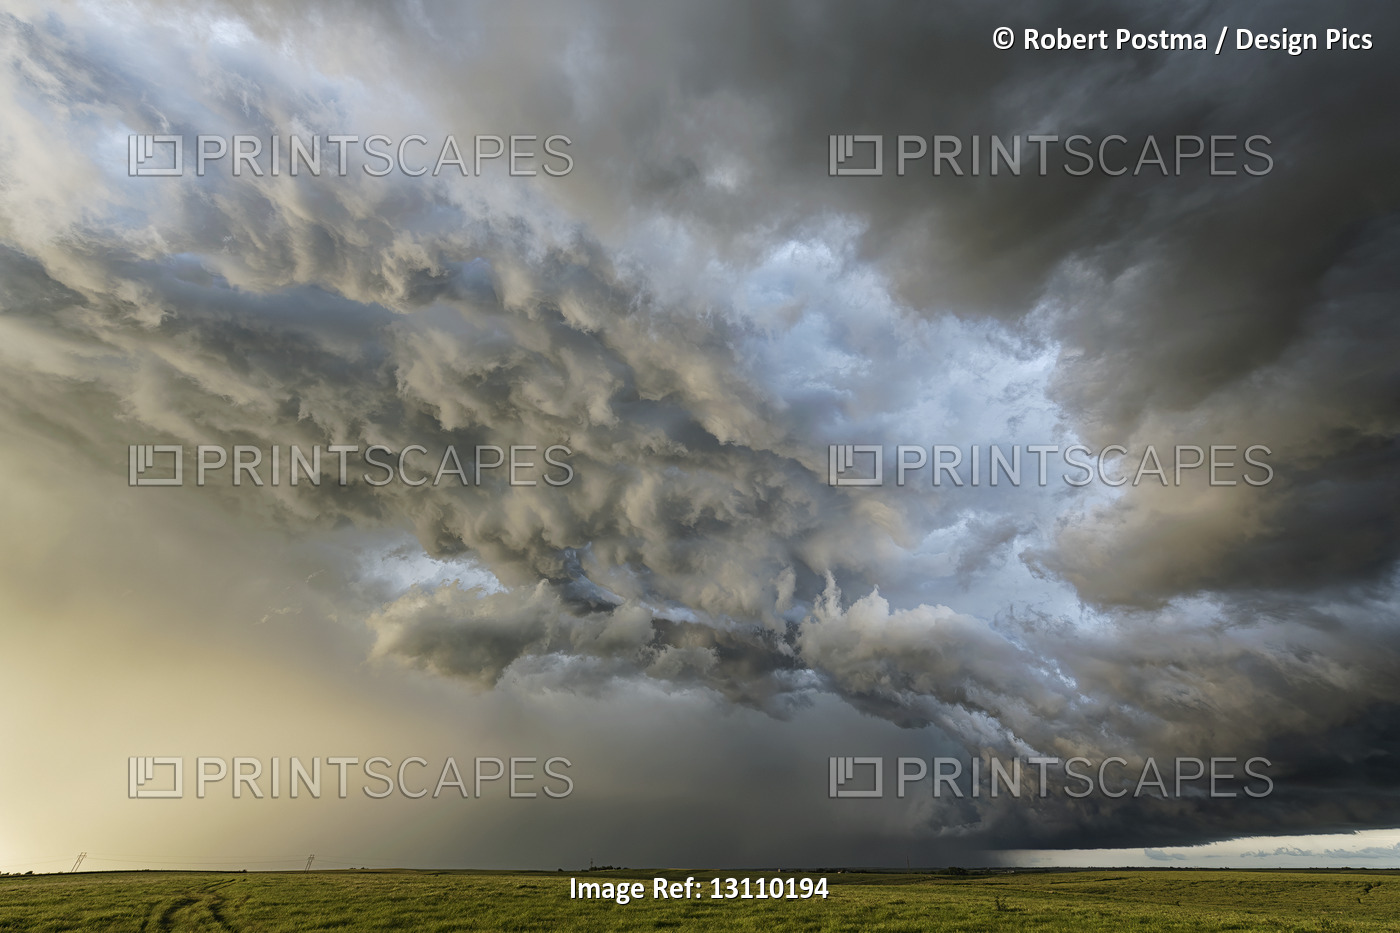 Amazing clouds over the landscape of the American mid-west as supercell ...